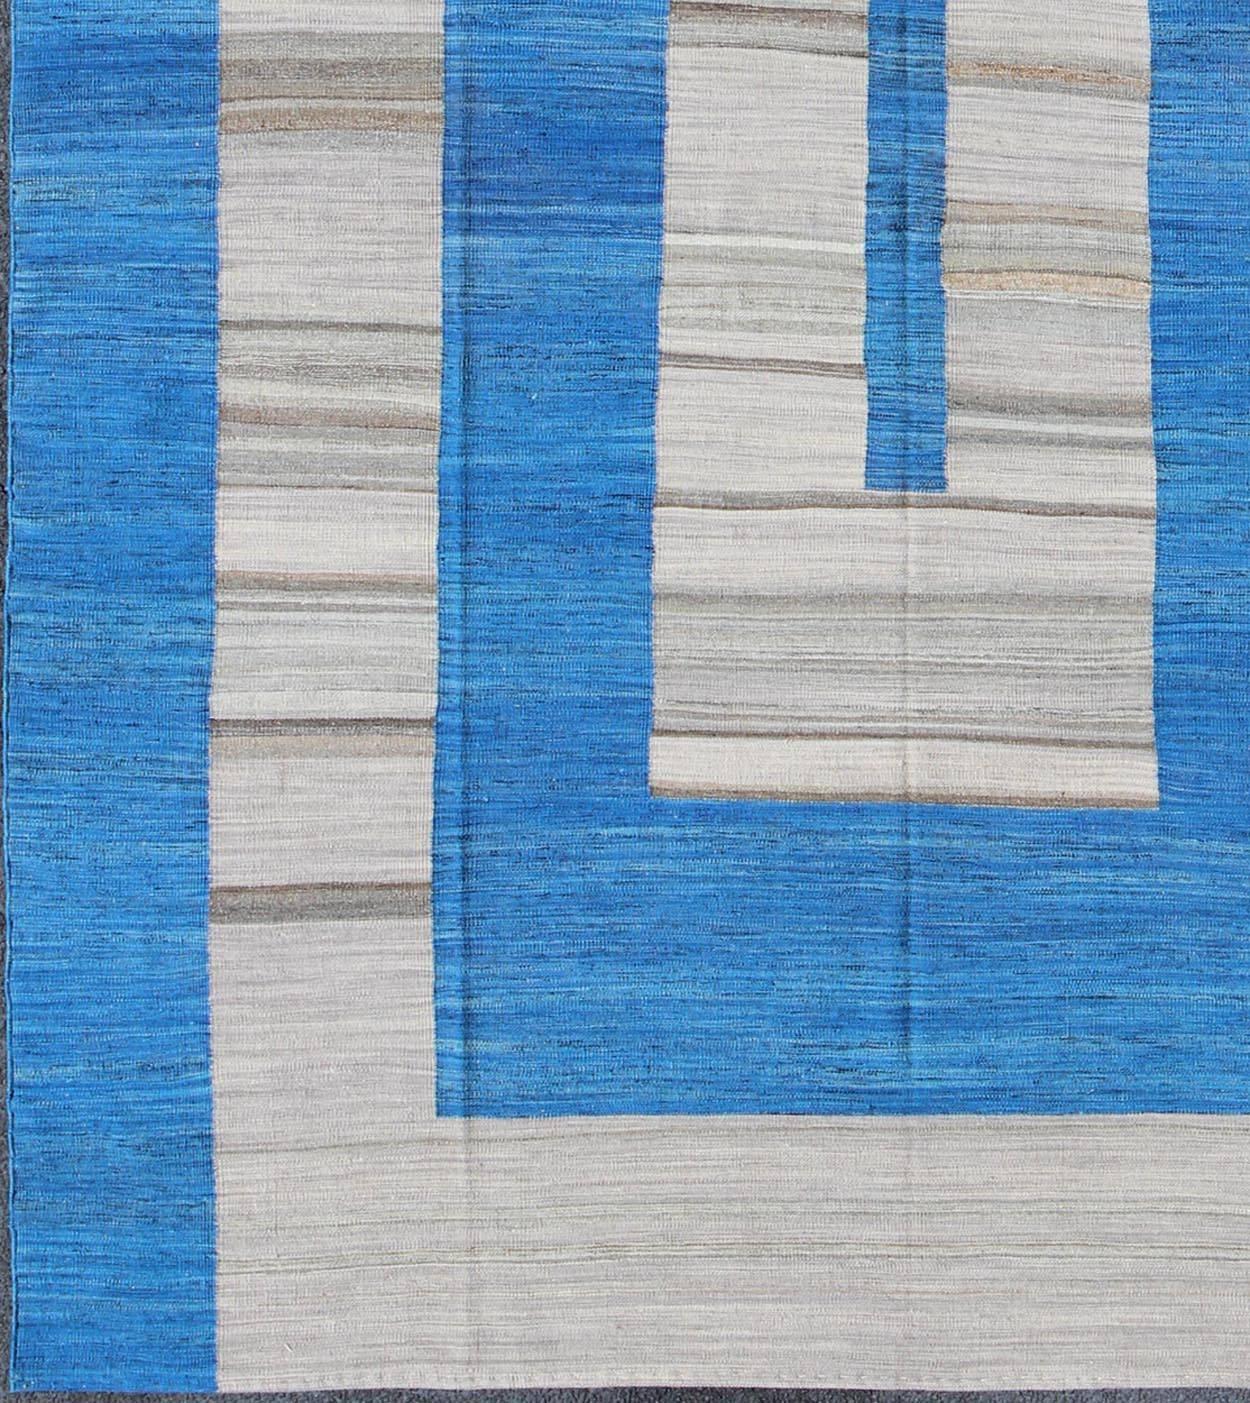 Afghan Kilim rug with large modern pattern in cobalt blue and gray, Keivan Woven Arts / rug orn-31251, country of origin / type: Afghanistan / Kilim.

This Afghan Kilim has a large-scale, modern pattern set on a vibrant cobalt blue